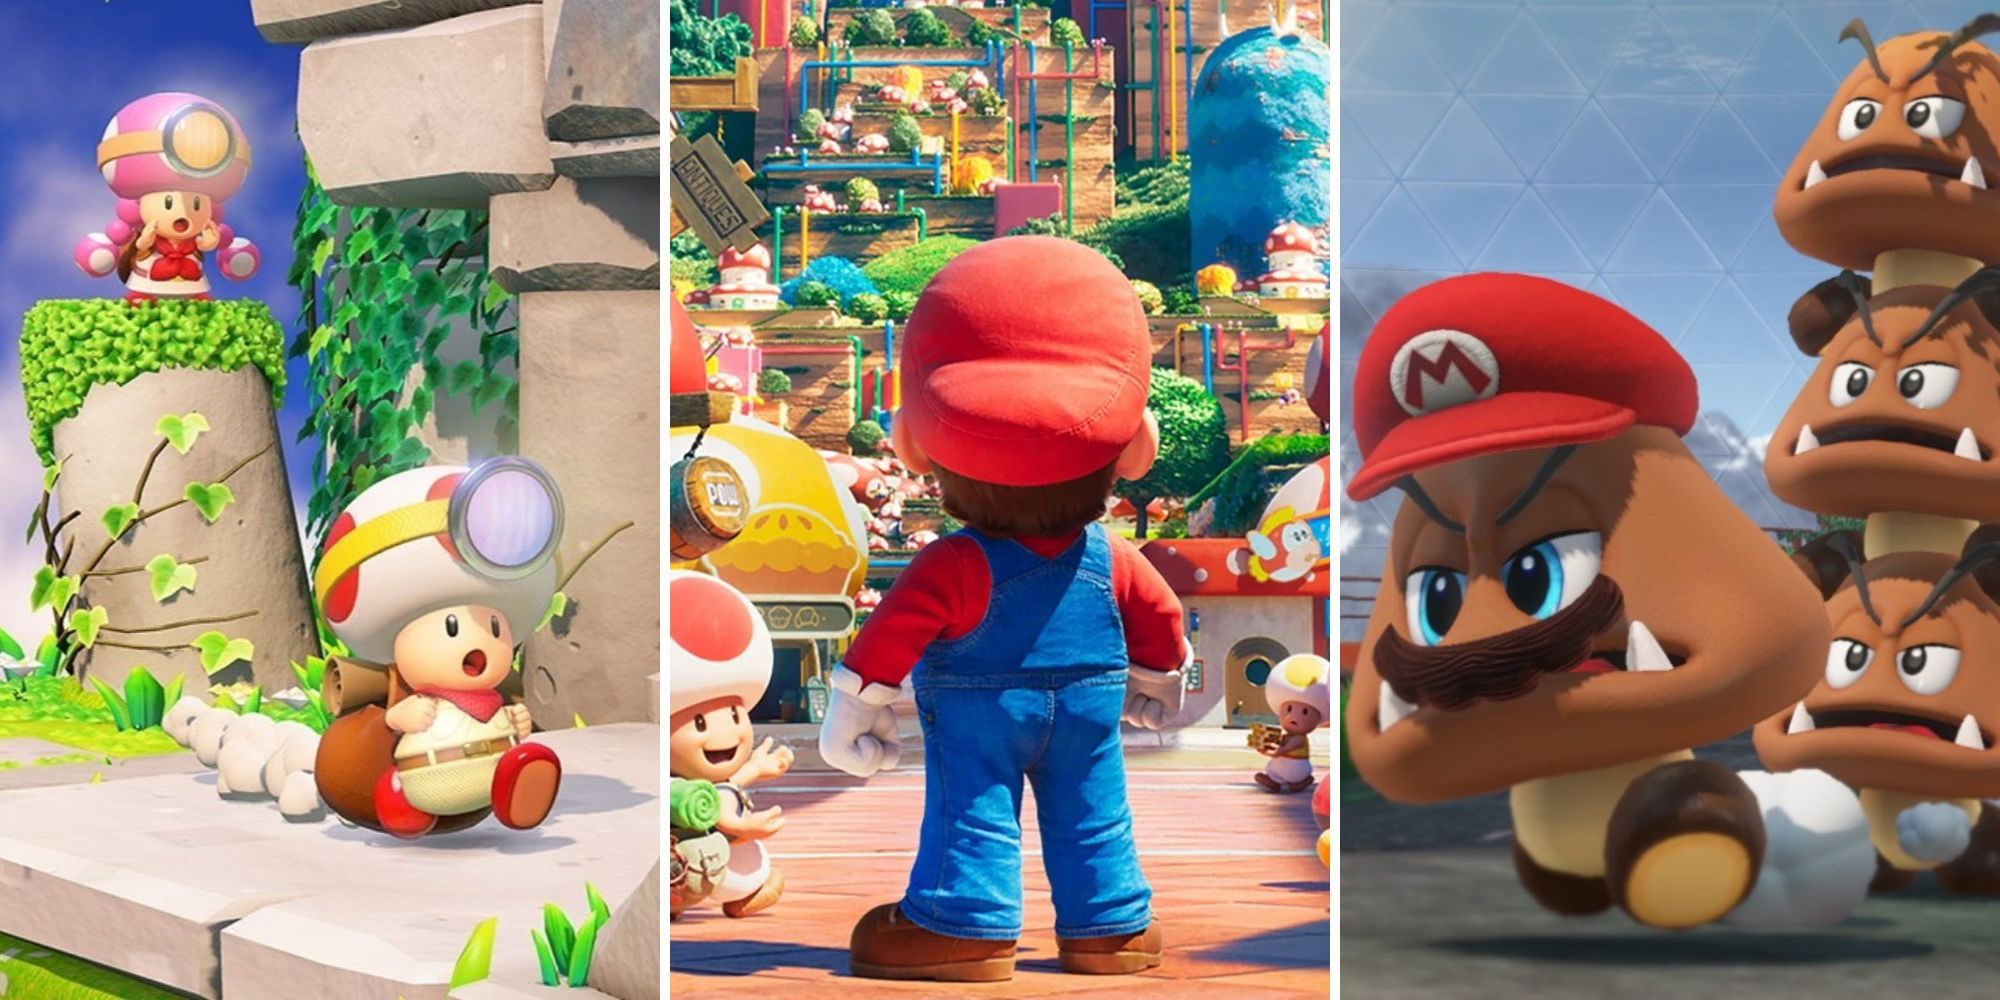 10 Things We'd Like To See In A Super Mario Bros. Movie Sequel